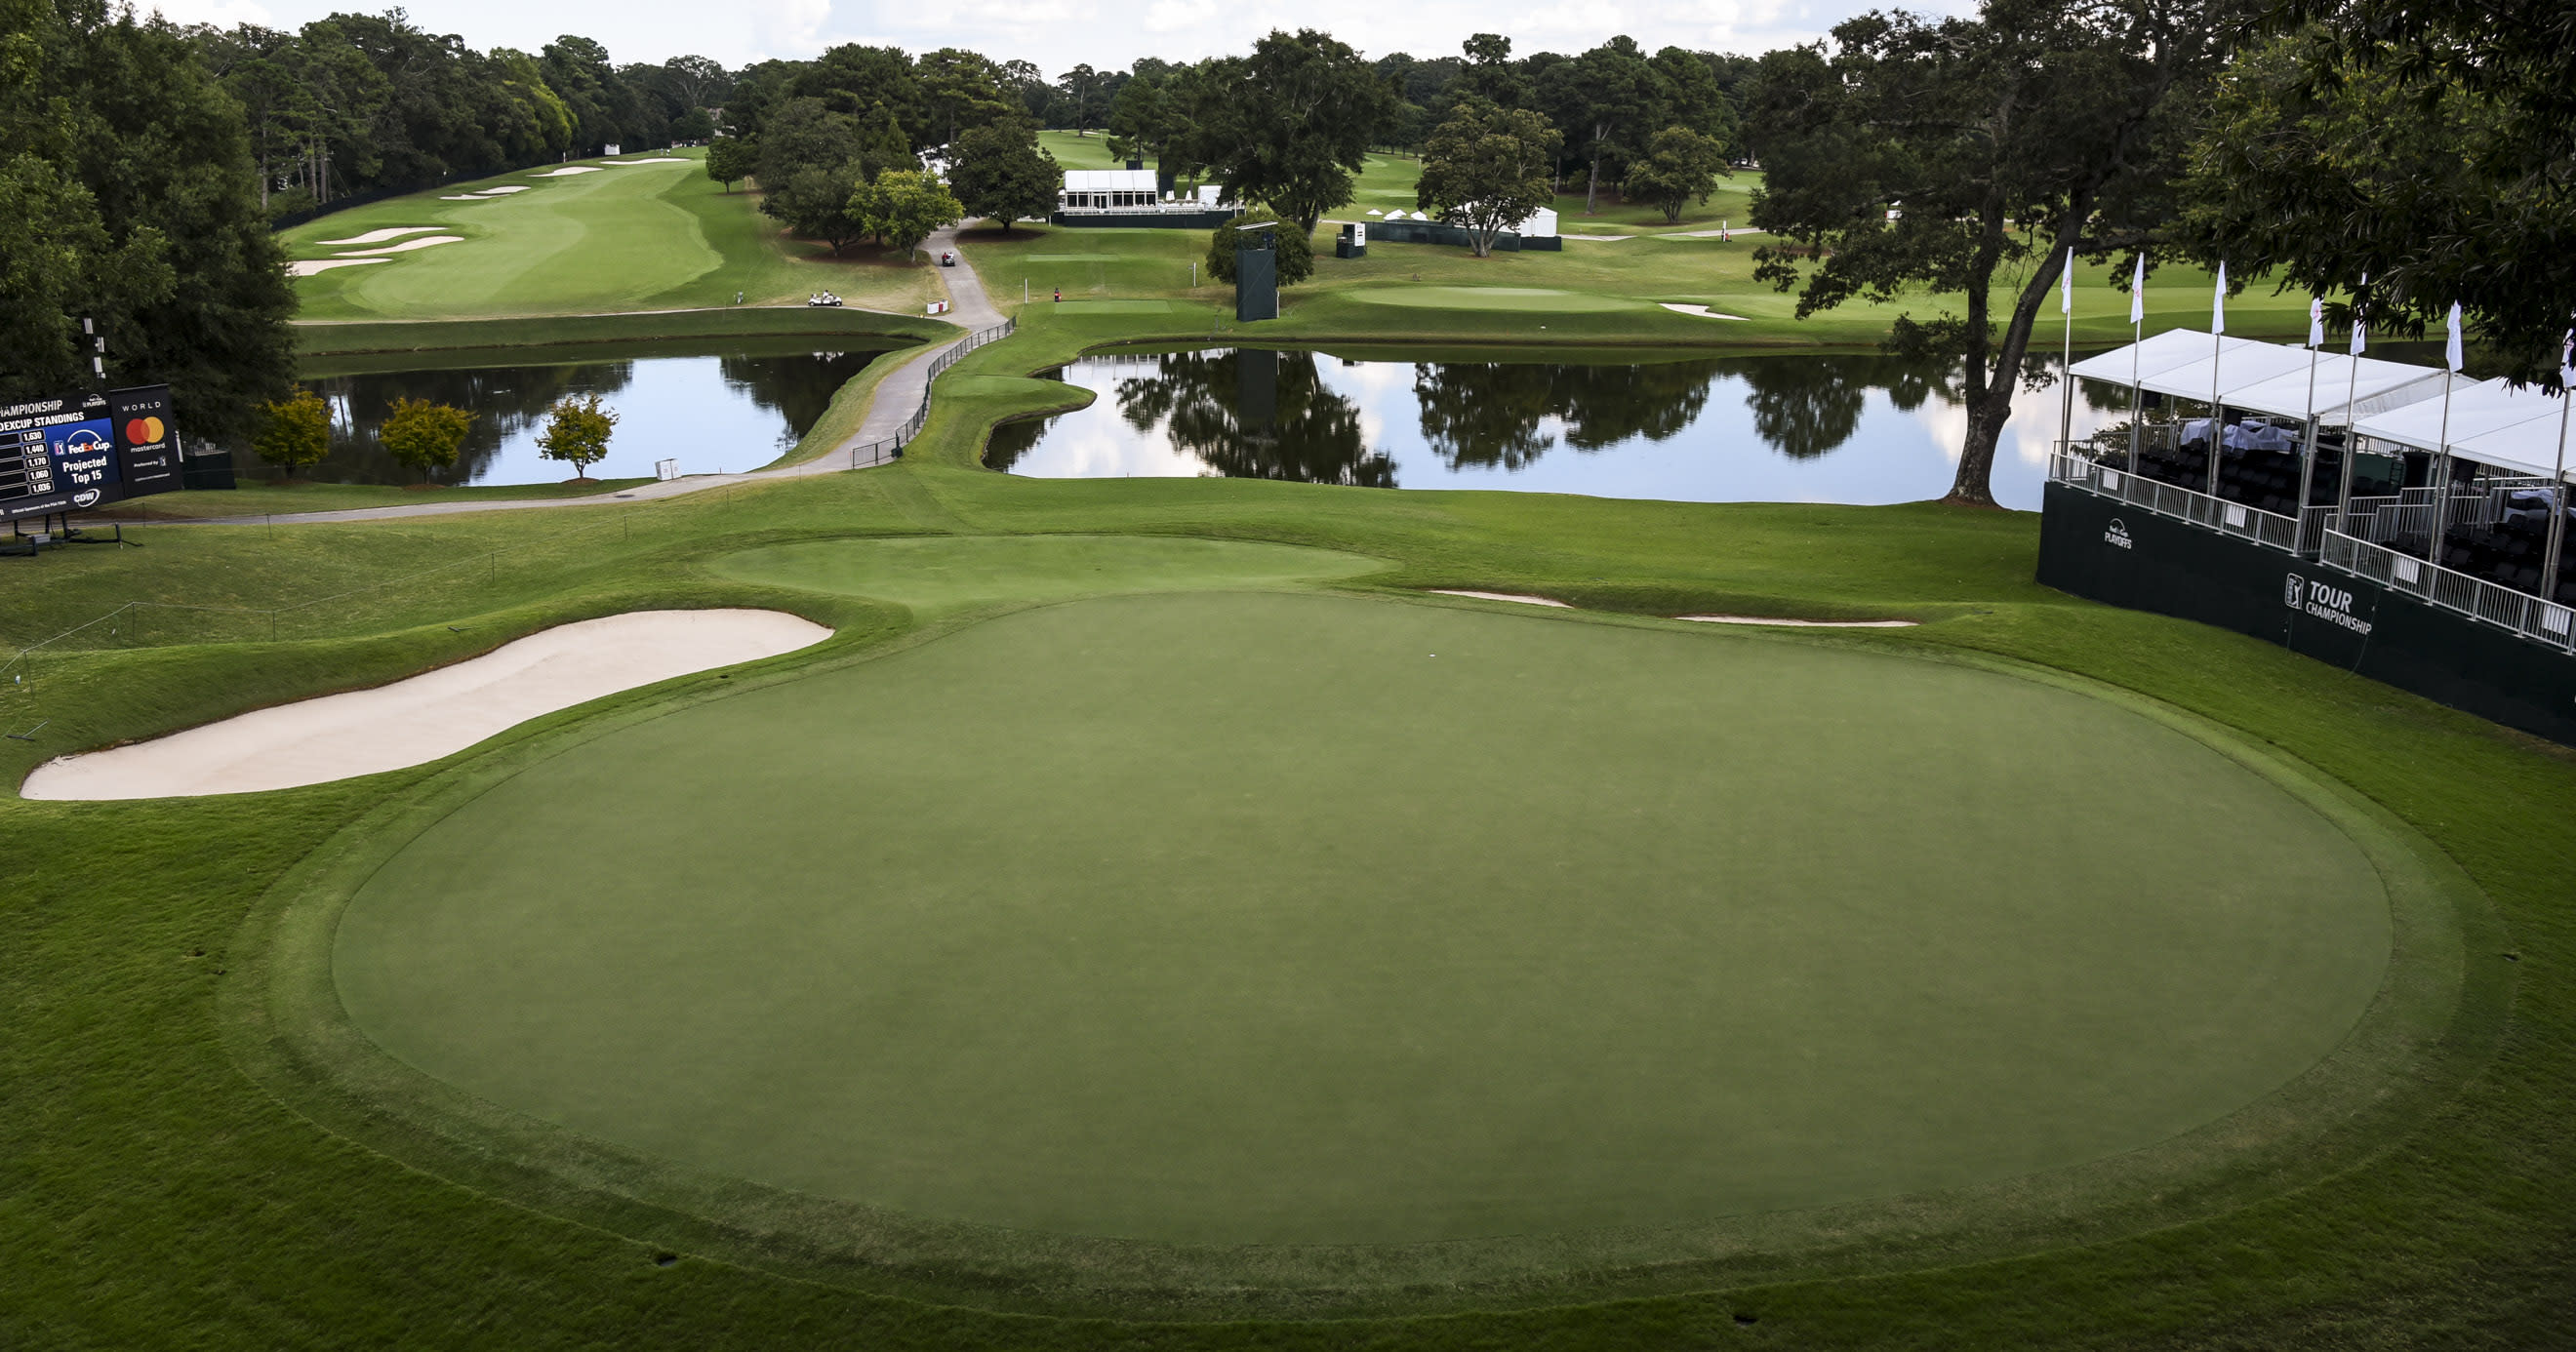 The week after the TOUR Championship, one of golf’s hottest architects